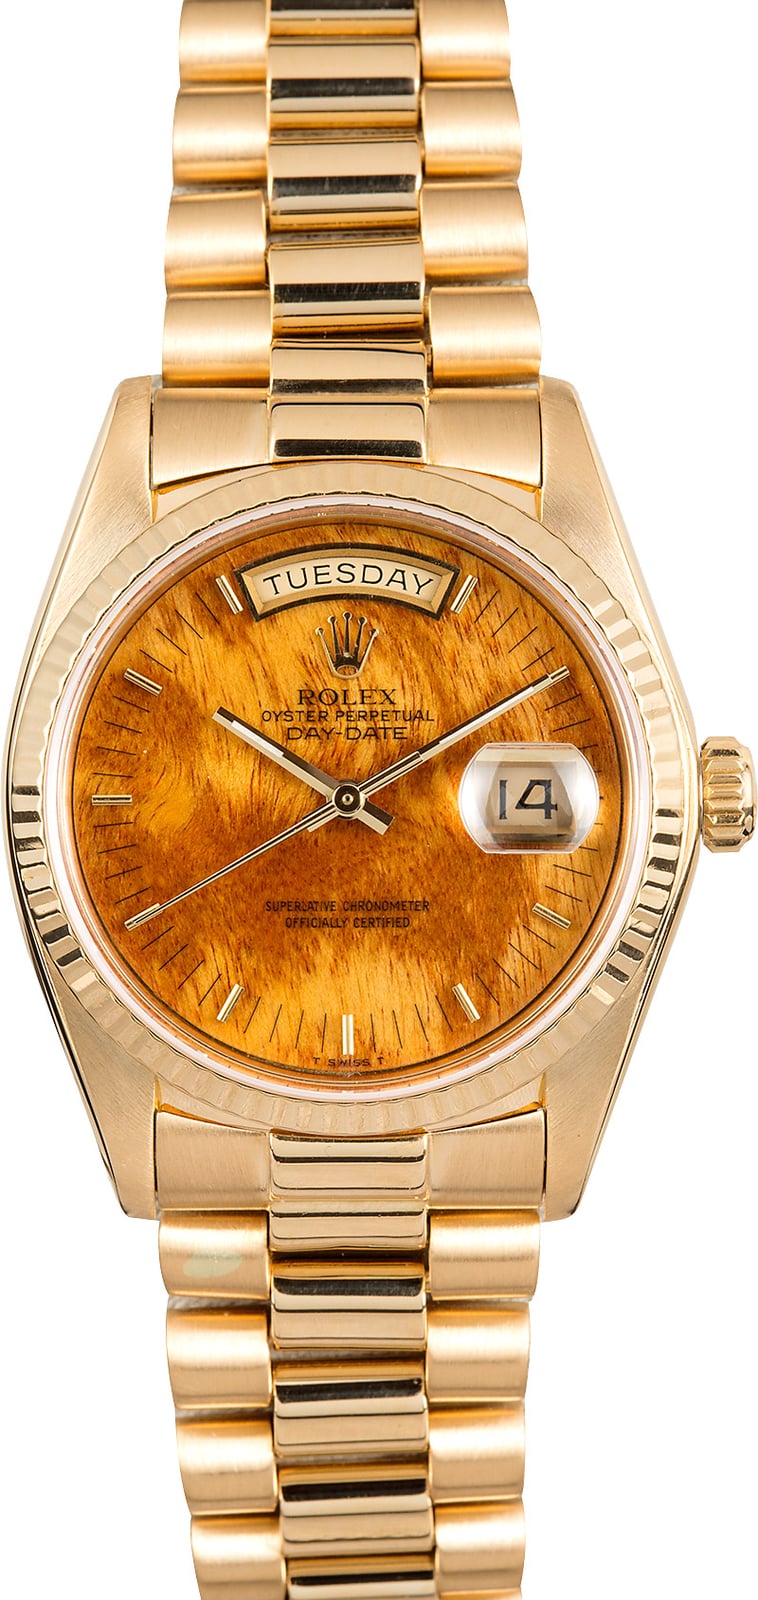 Rolex Day-Date President 18038 Wood Dial